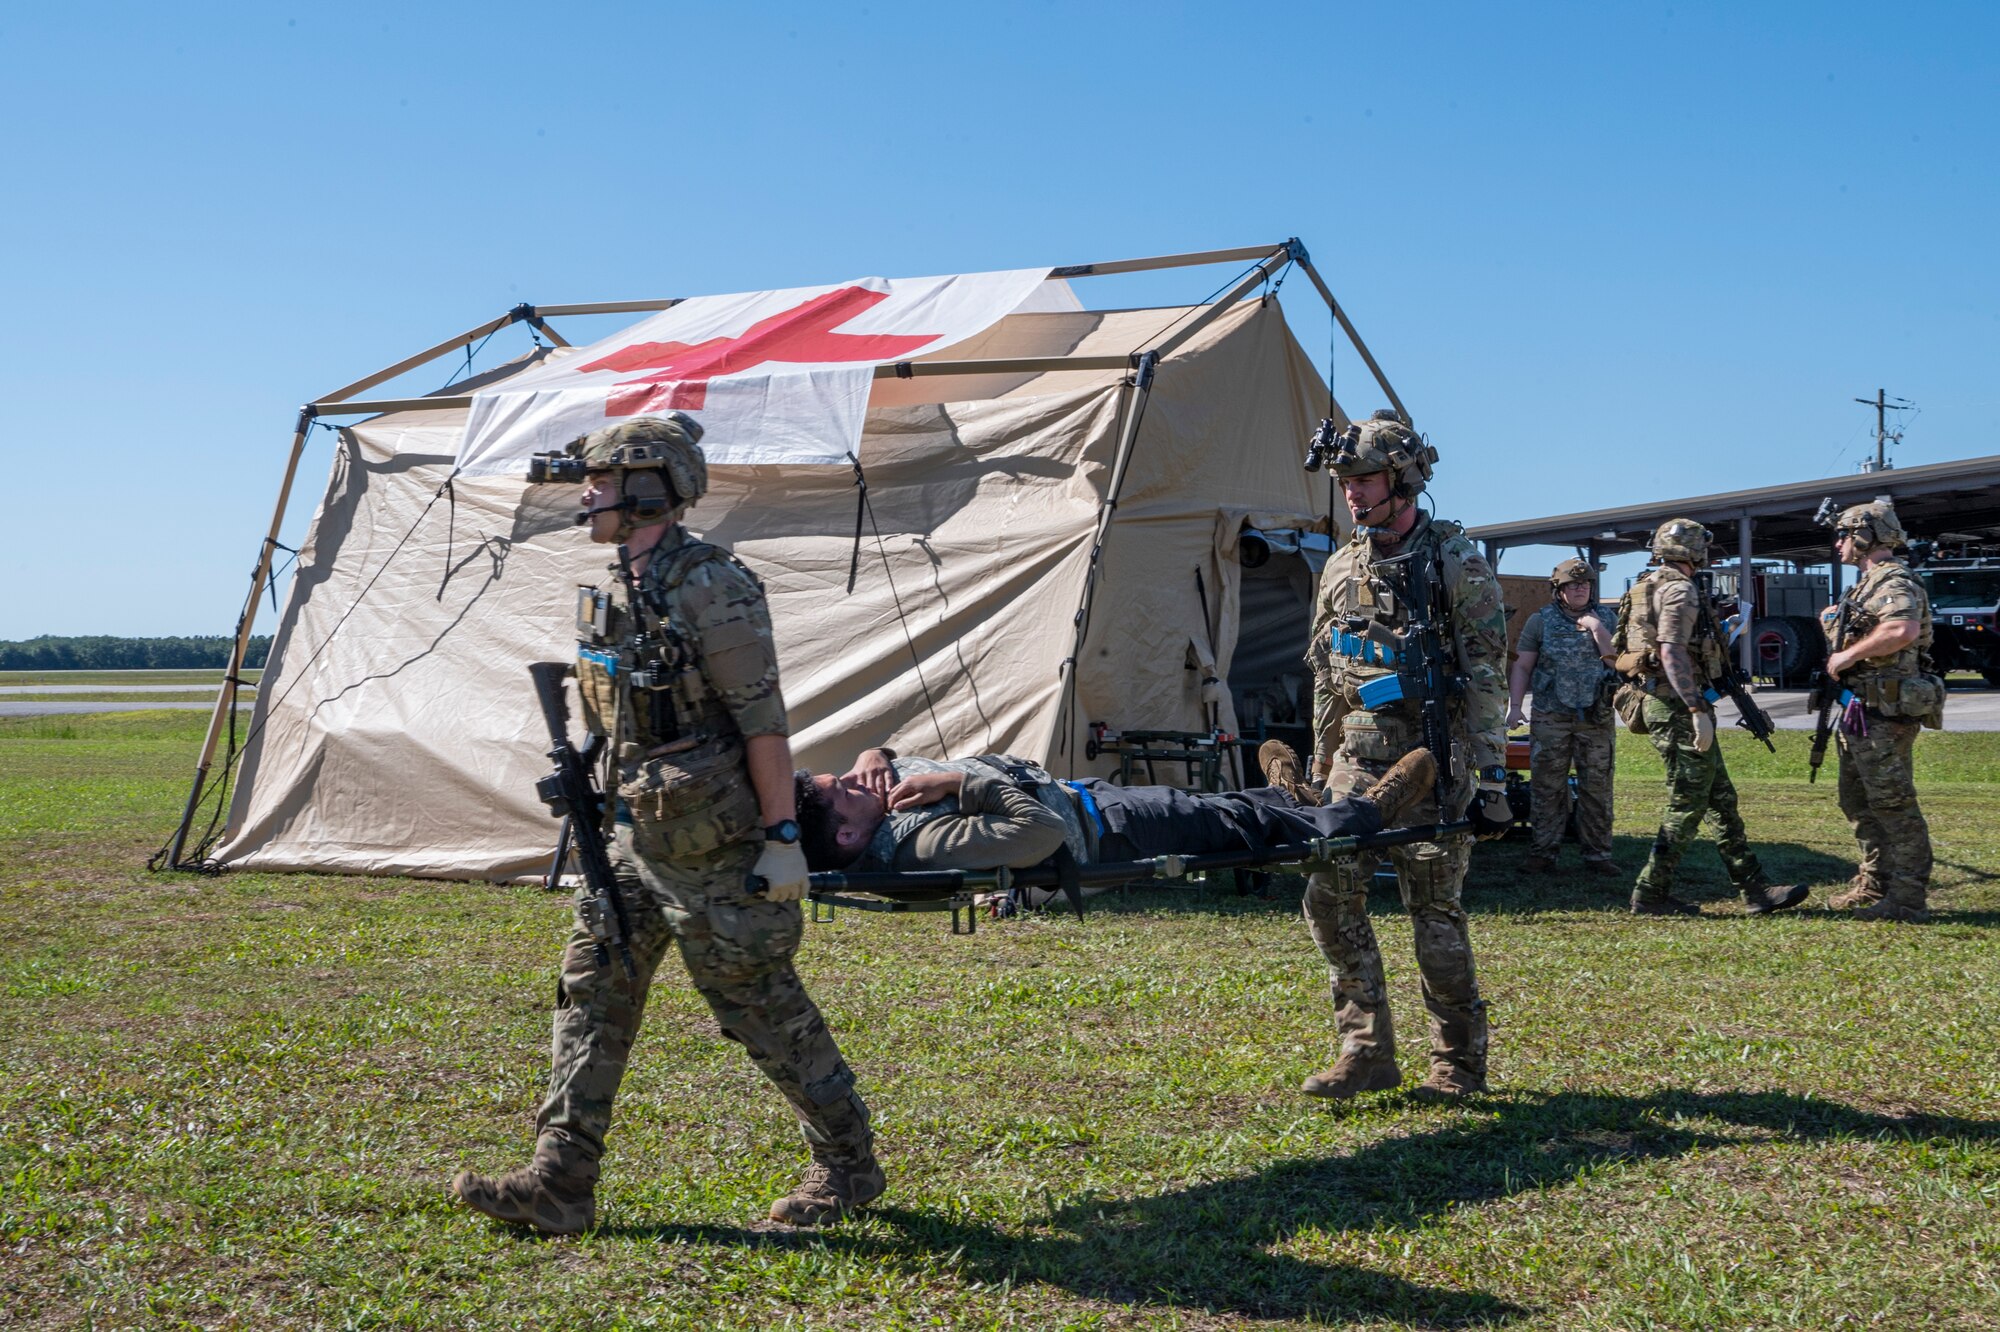 U.S. Air Force Airmen assigned to the 38th Rescue Squadron carry a simulated casualty during Exercise Ready Tiger 24-1 at Avon Park Air Force Range, Florida, April 14, 2024. The mass casualty exercise tested the medical team’s readiness by presenting them with more patients at once than the clinic can immediately handle. Ready Tiger 24-1 is a readiness exercise demonstrating the 23rd Wing’s ability to plan, prepare and execute operations and maintenance to project air power in contested and dispersed locations, defending the United States’ interests and allies. (U.S. Air Force photo by Airman 1st Class Leonid Soubbotine)